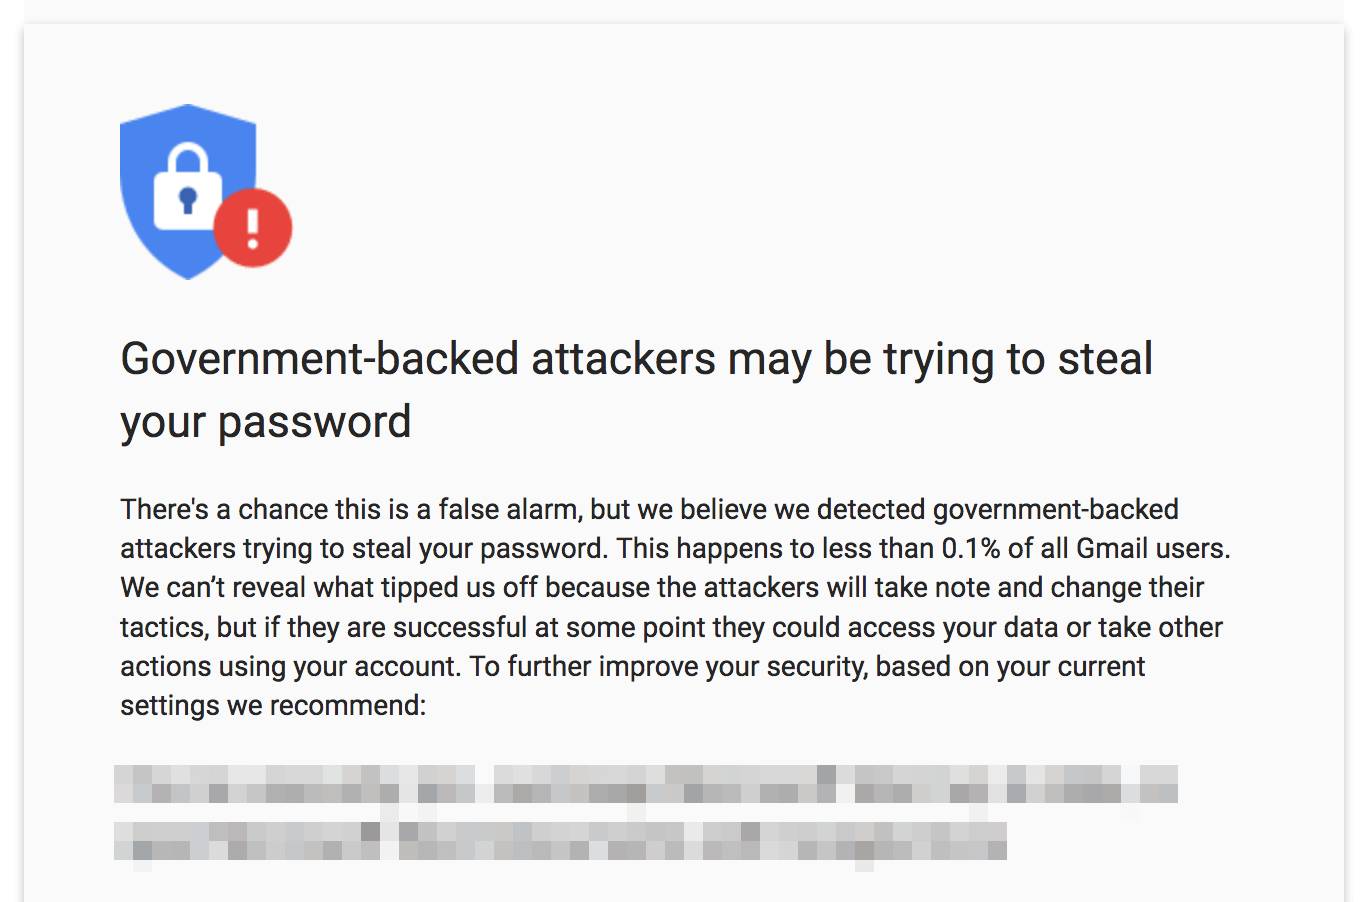 Government-backed attackers may be trying to steal your password